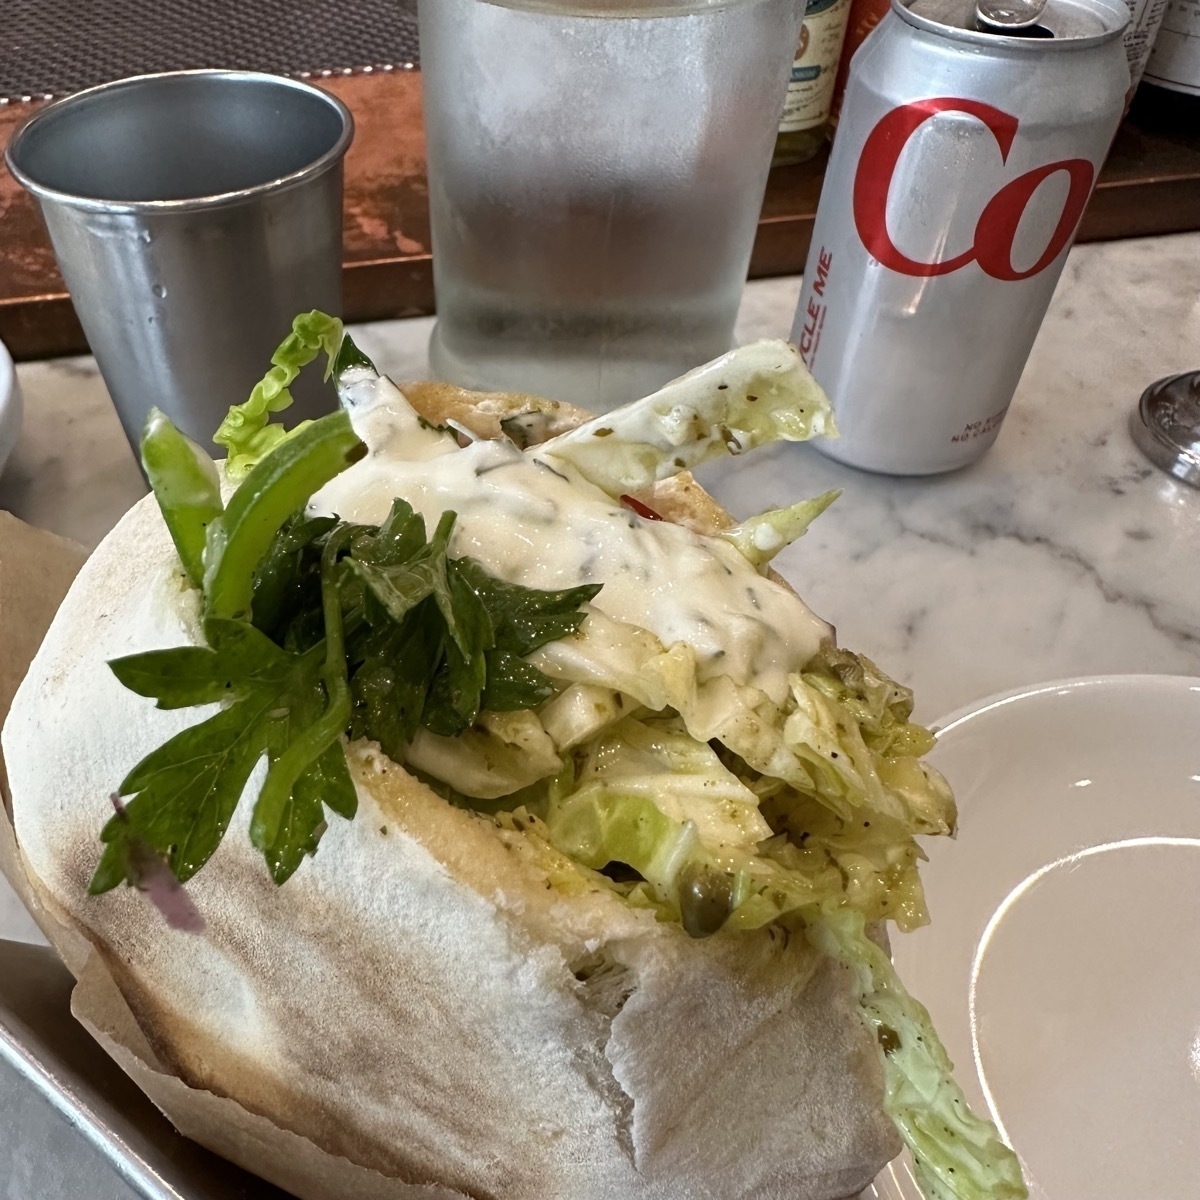 A lamb gyro in a pita held in a metal rack for pitas or tacos on a marble-like surface.